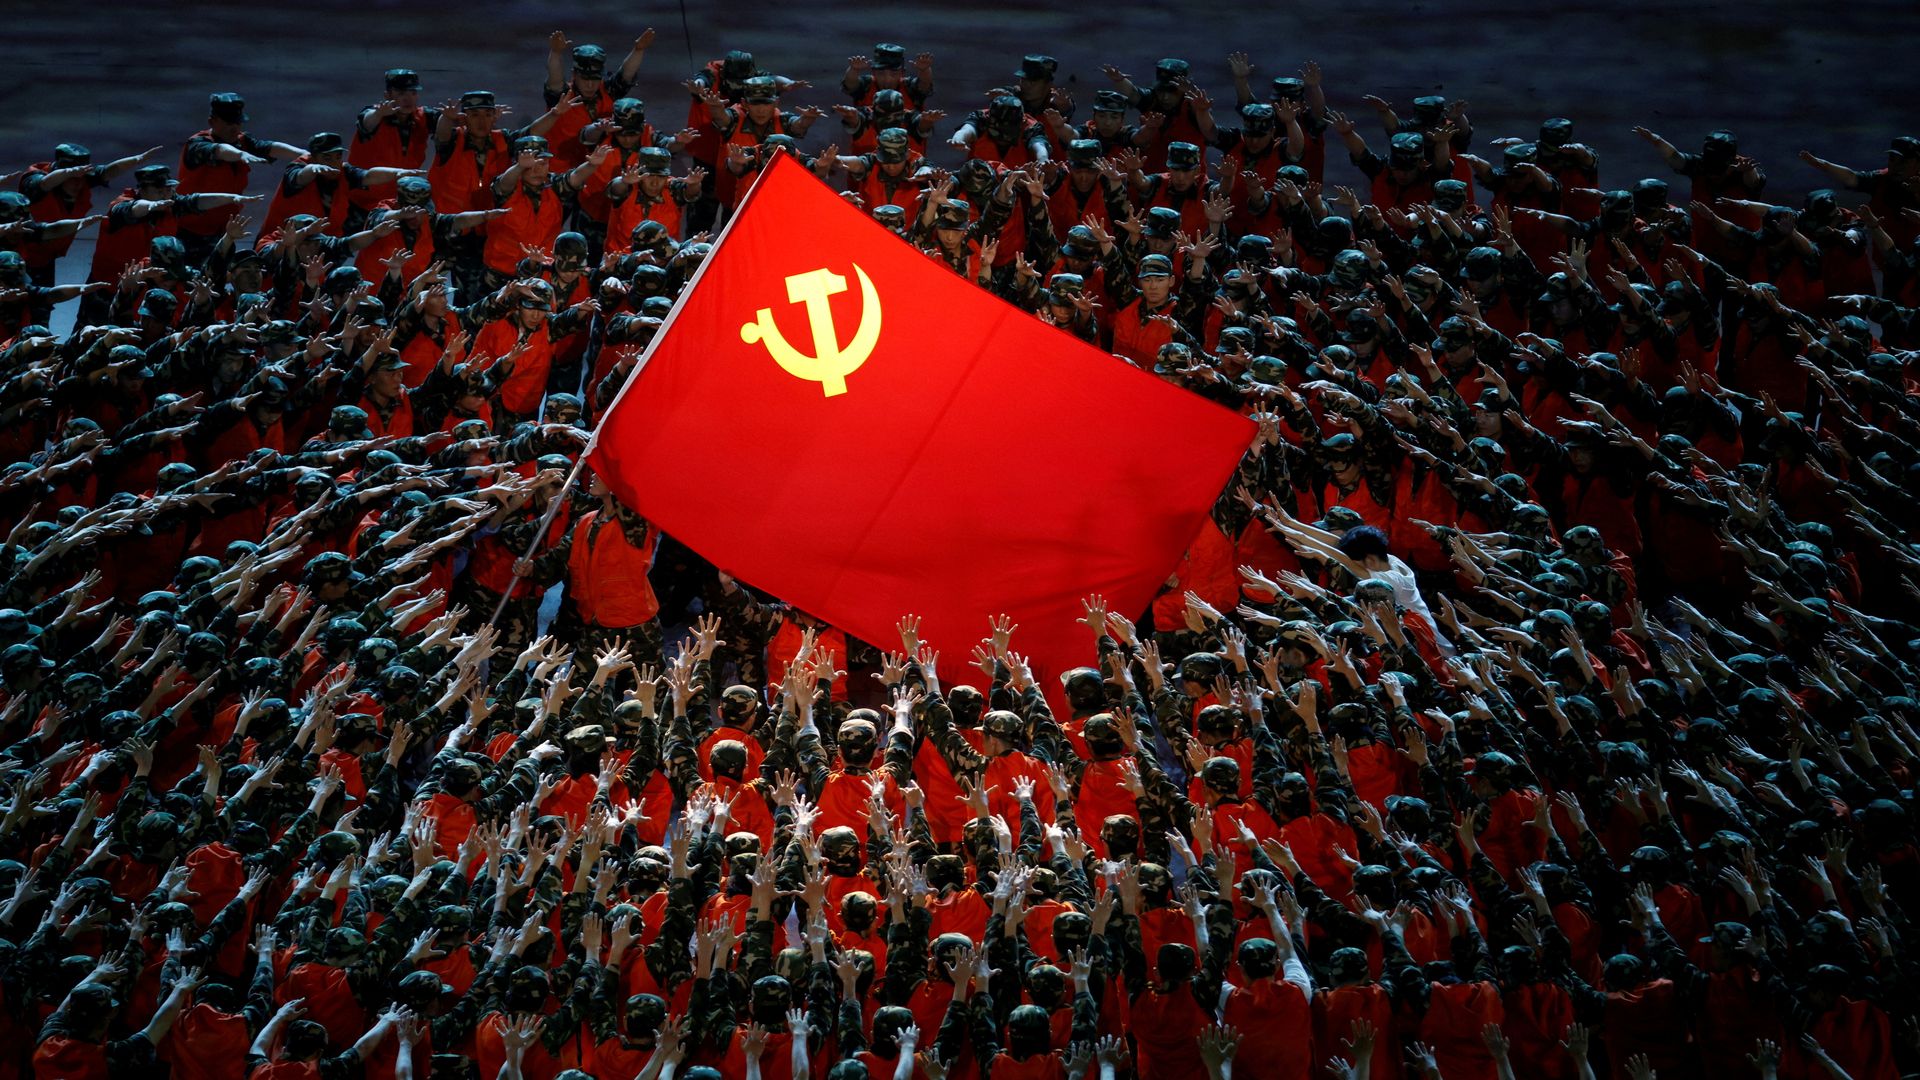 Performers rally around the Red Flag during a show commemorating the 100th anniversary of the founding of the Communist Party of China at the National Stadium in Beijing